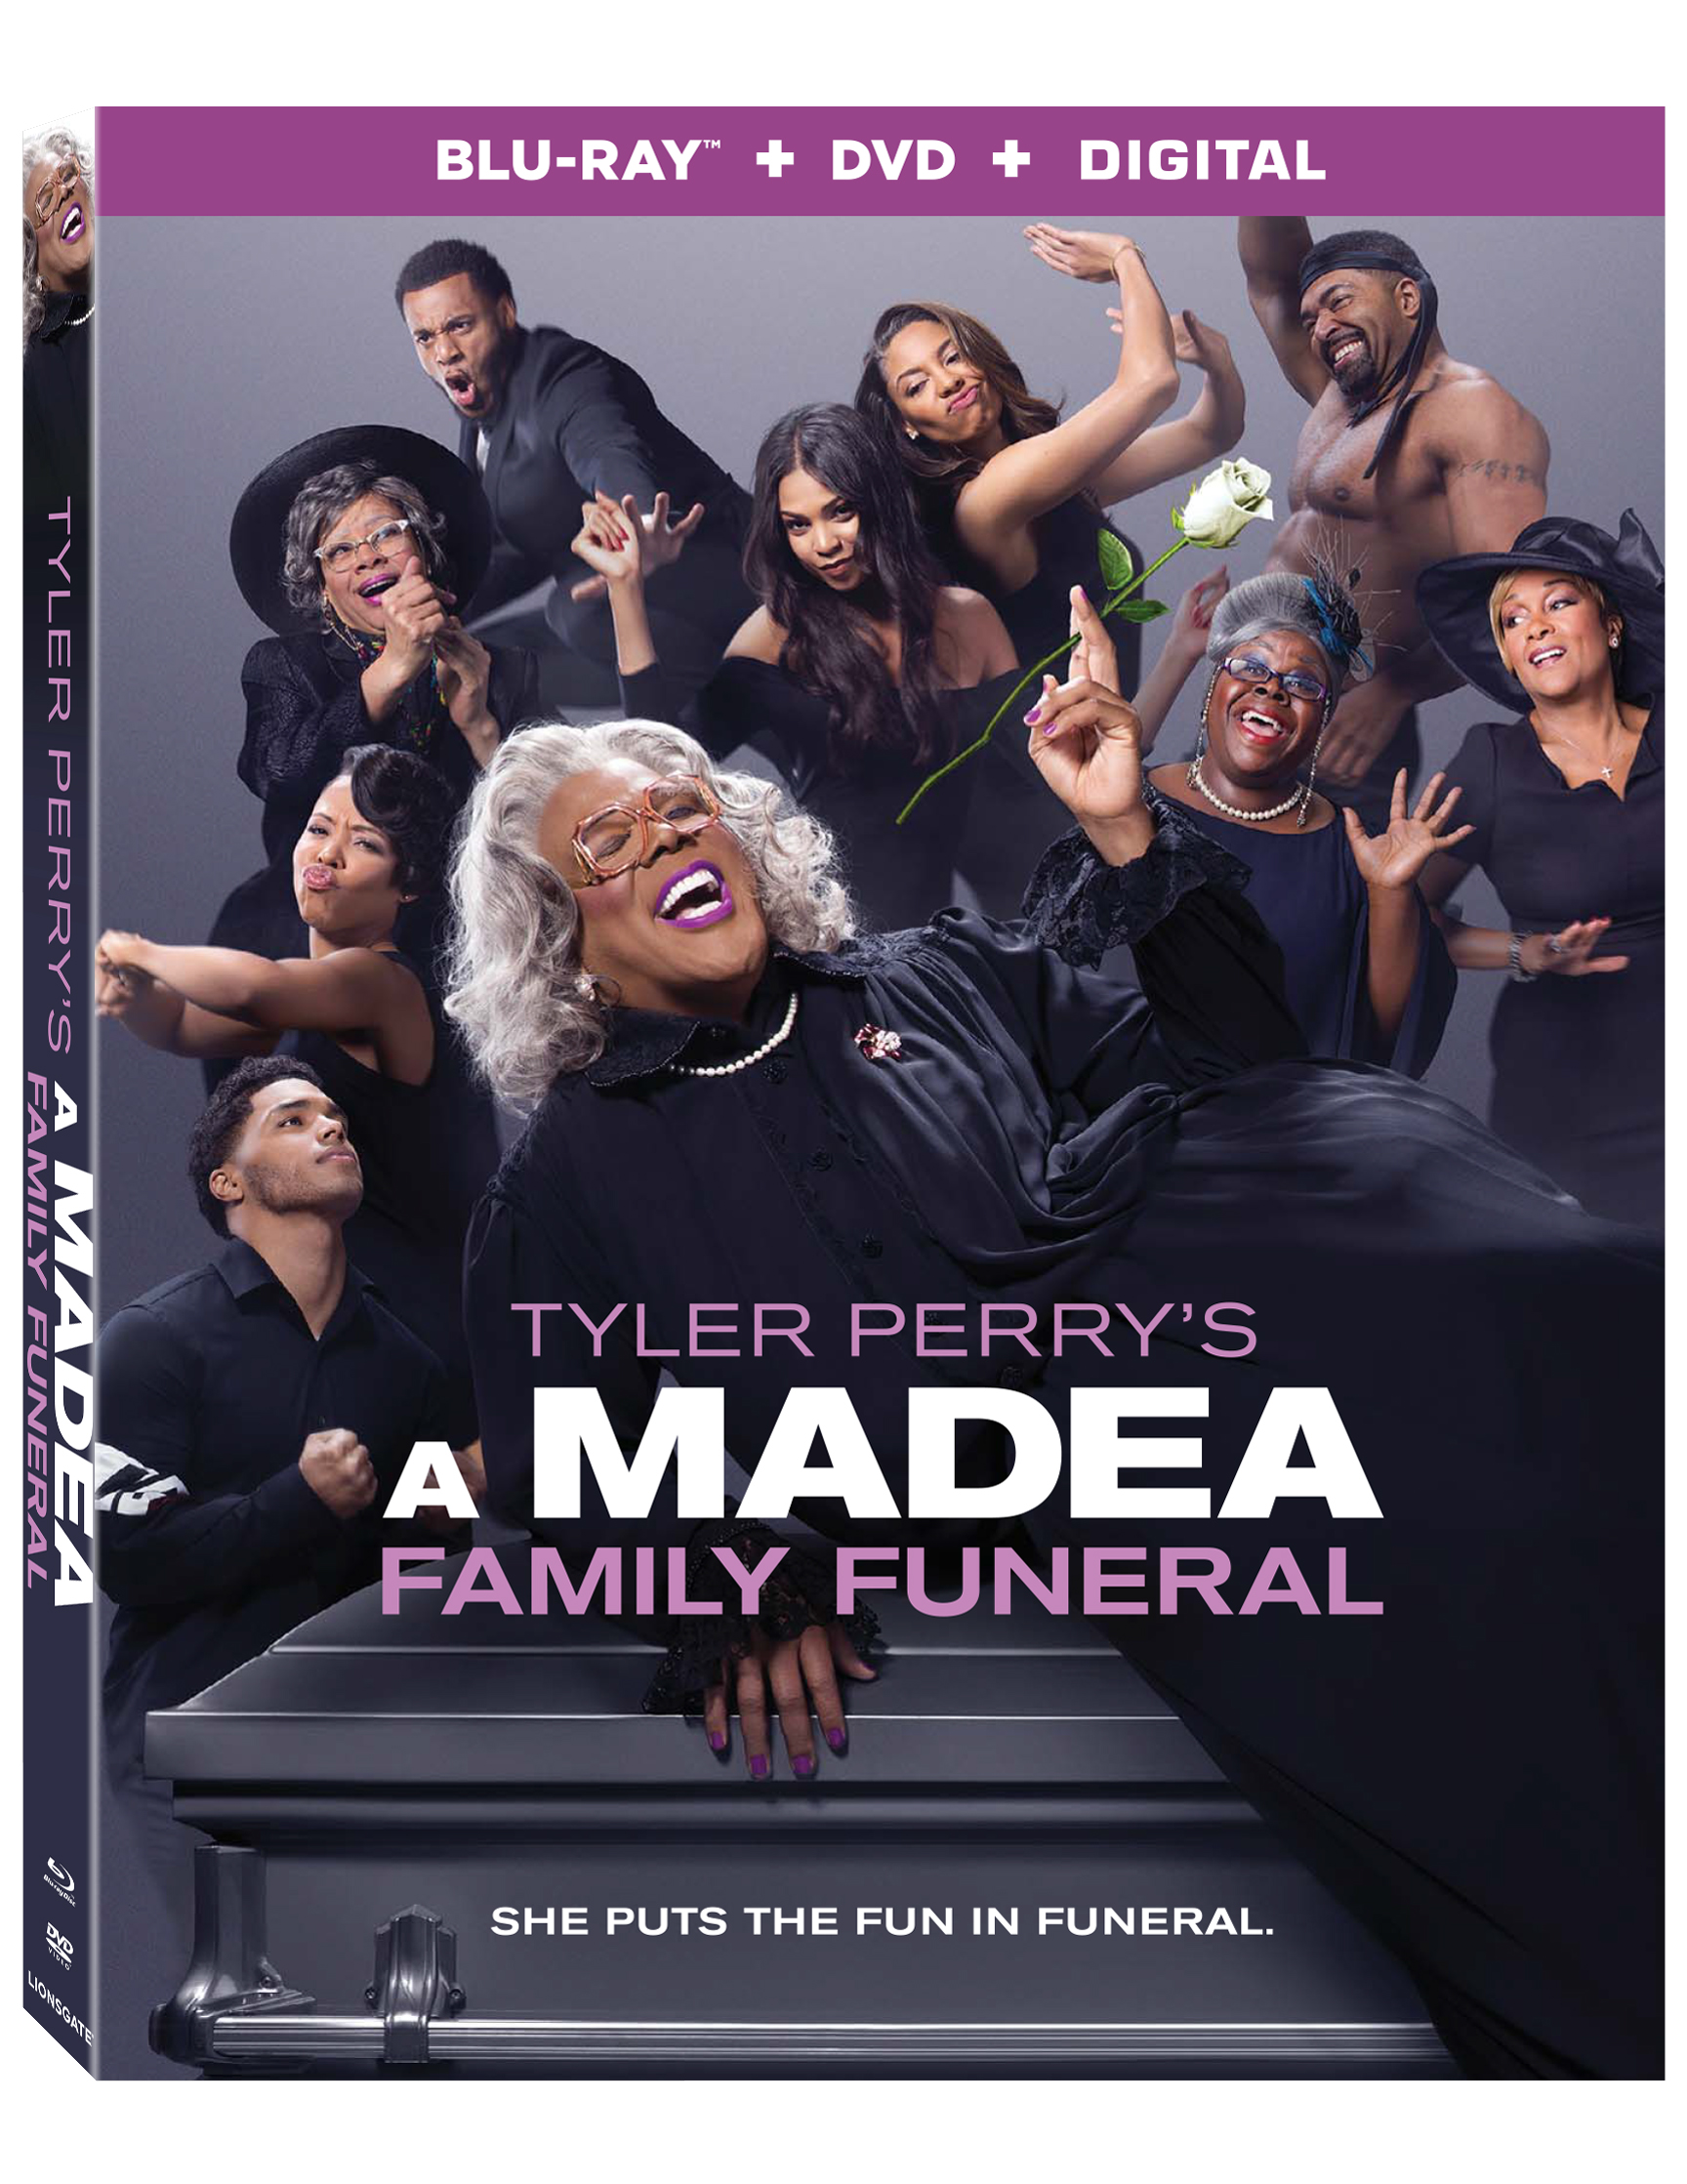 'Tyler Perry's A Madea Family Funeral' Coming to Blu-ray ...